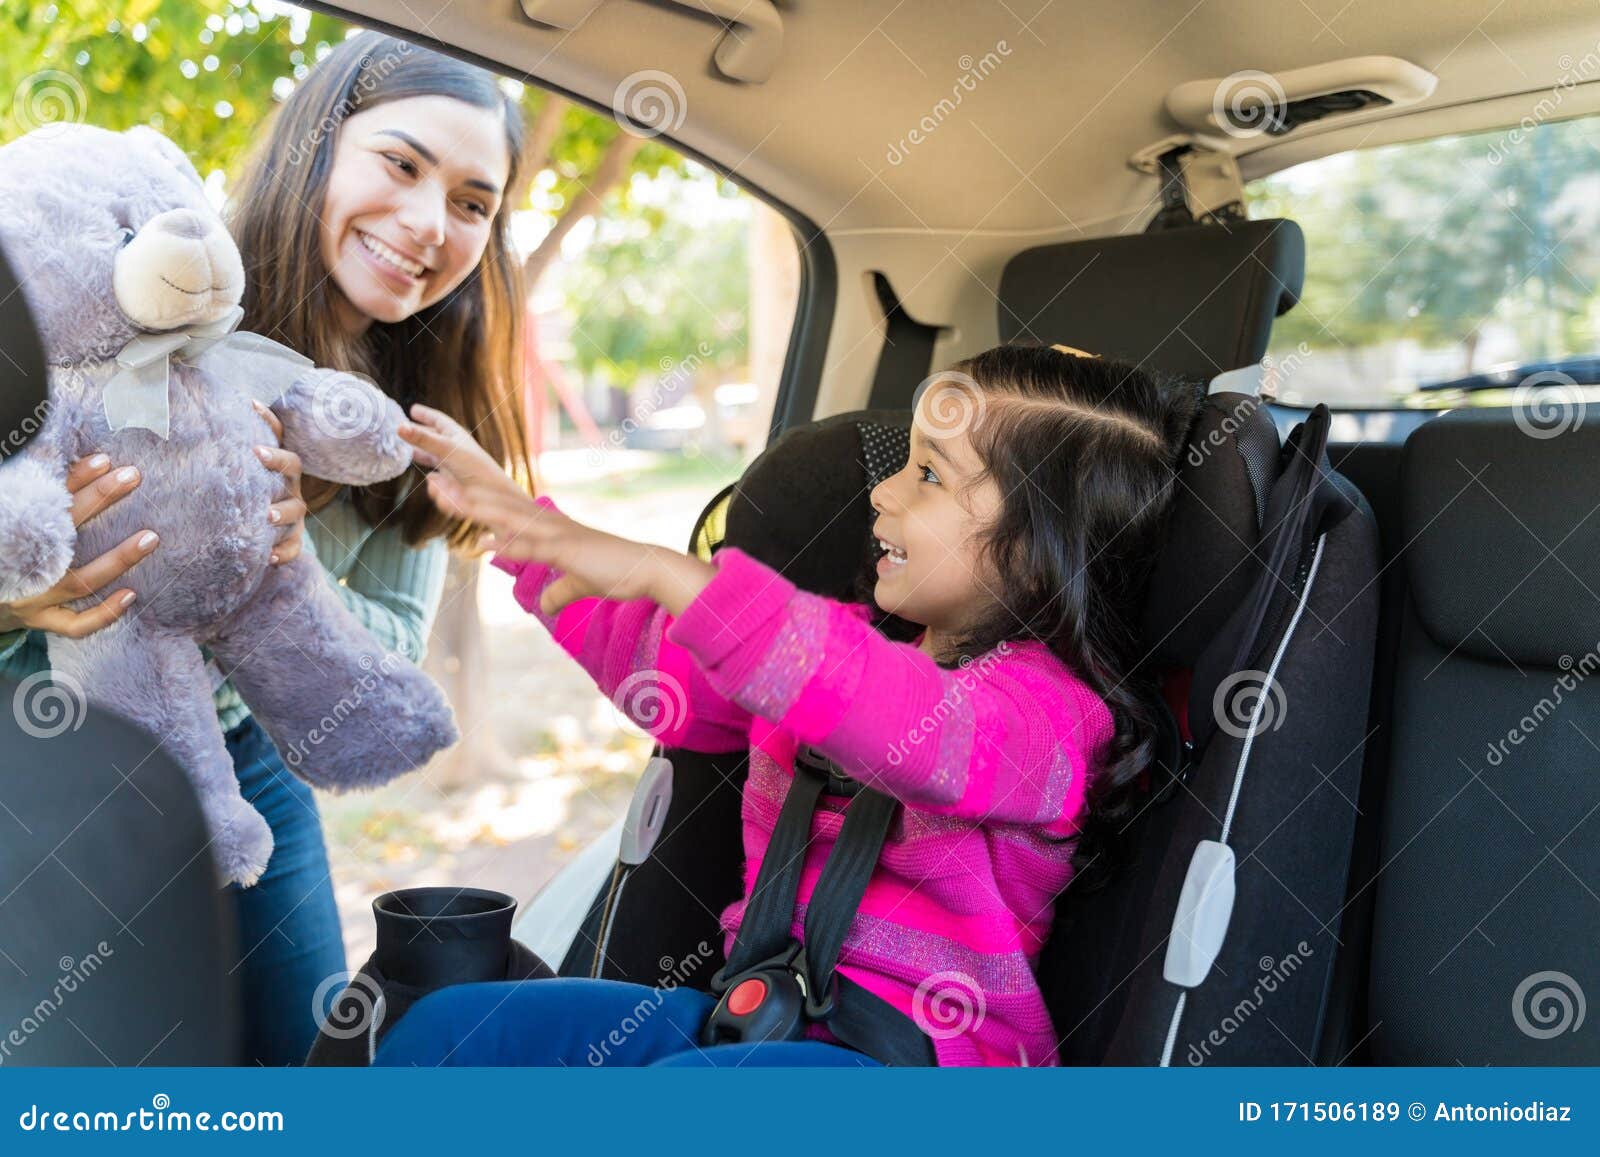 Woman Giving Surprise Gift To Daughter Stock Image - Image of girl,  excited: 171506189